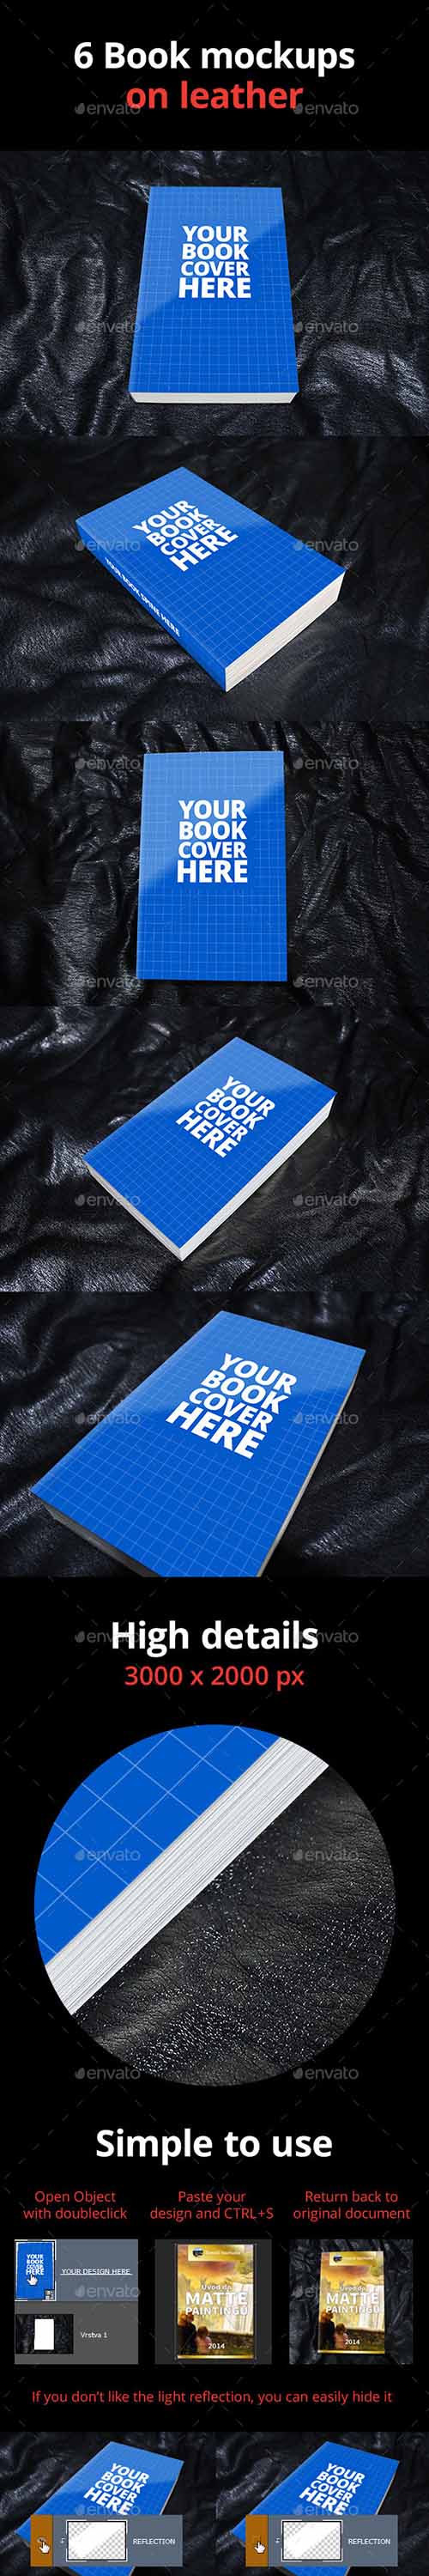 GraphicRiver - 5 Book Mockups on Leather - 11178563